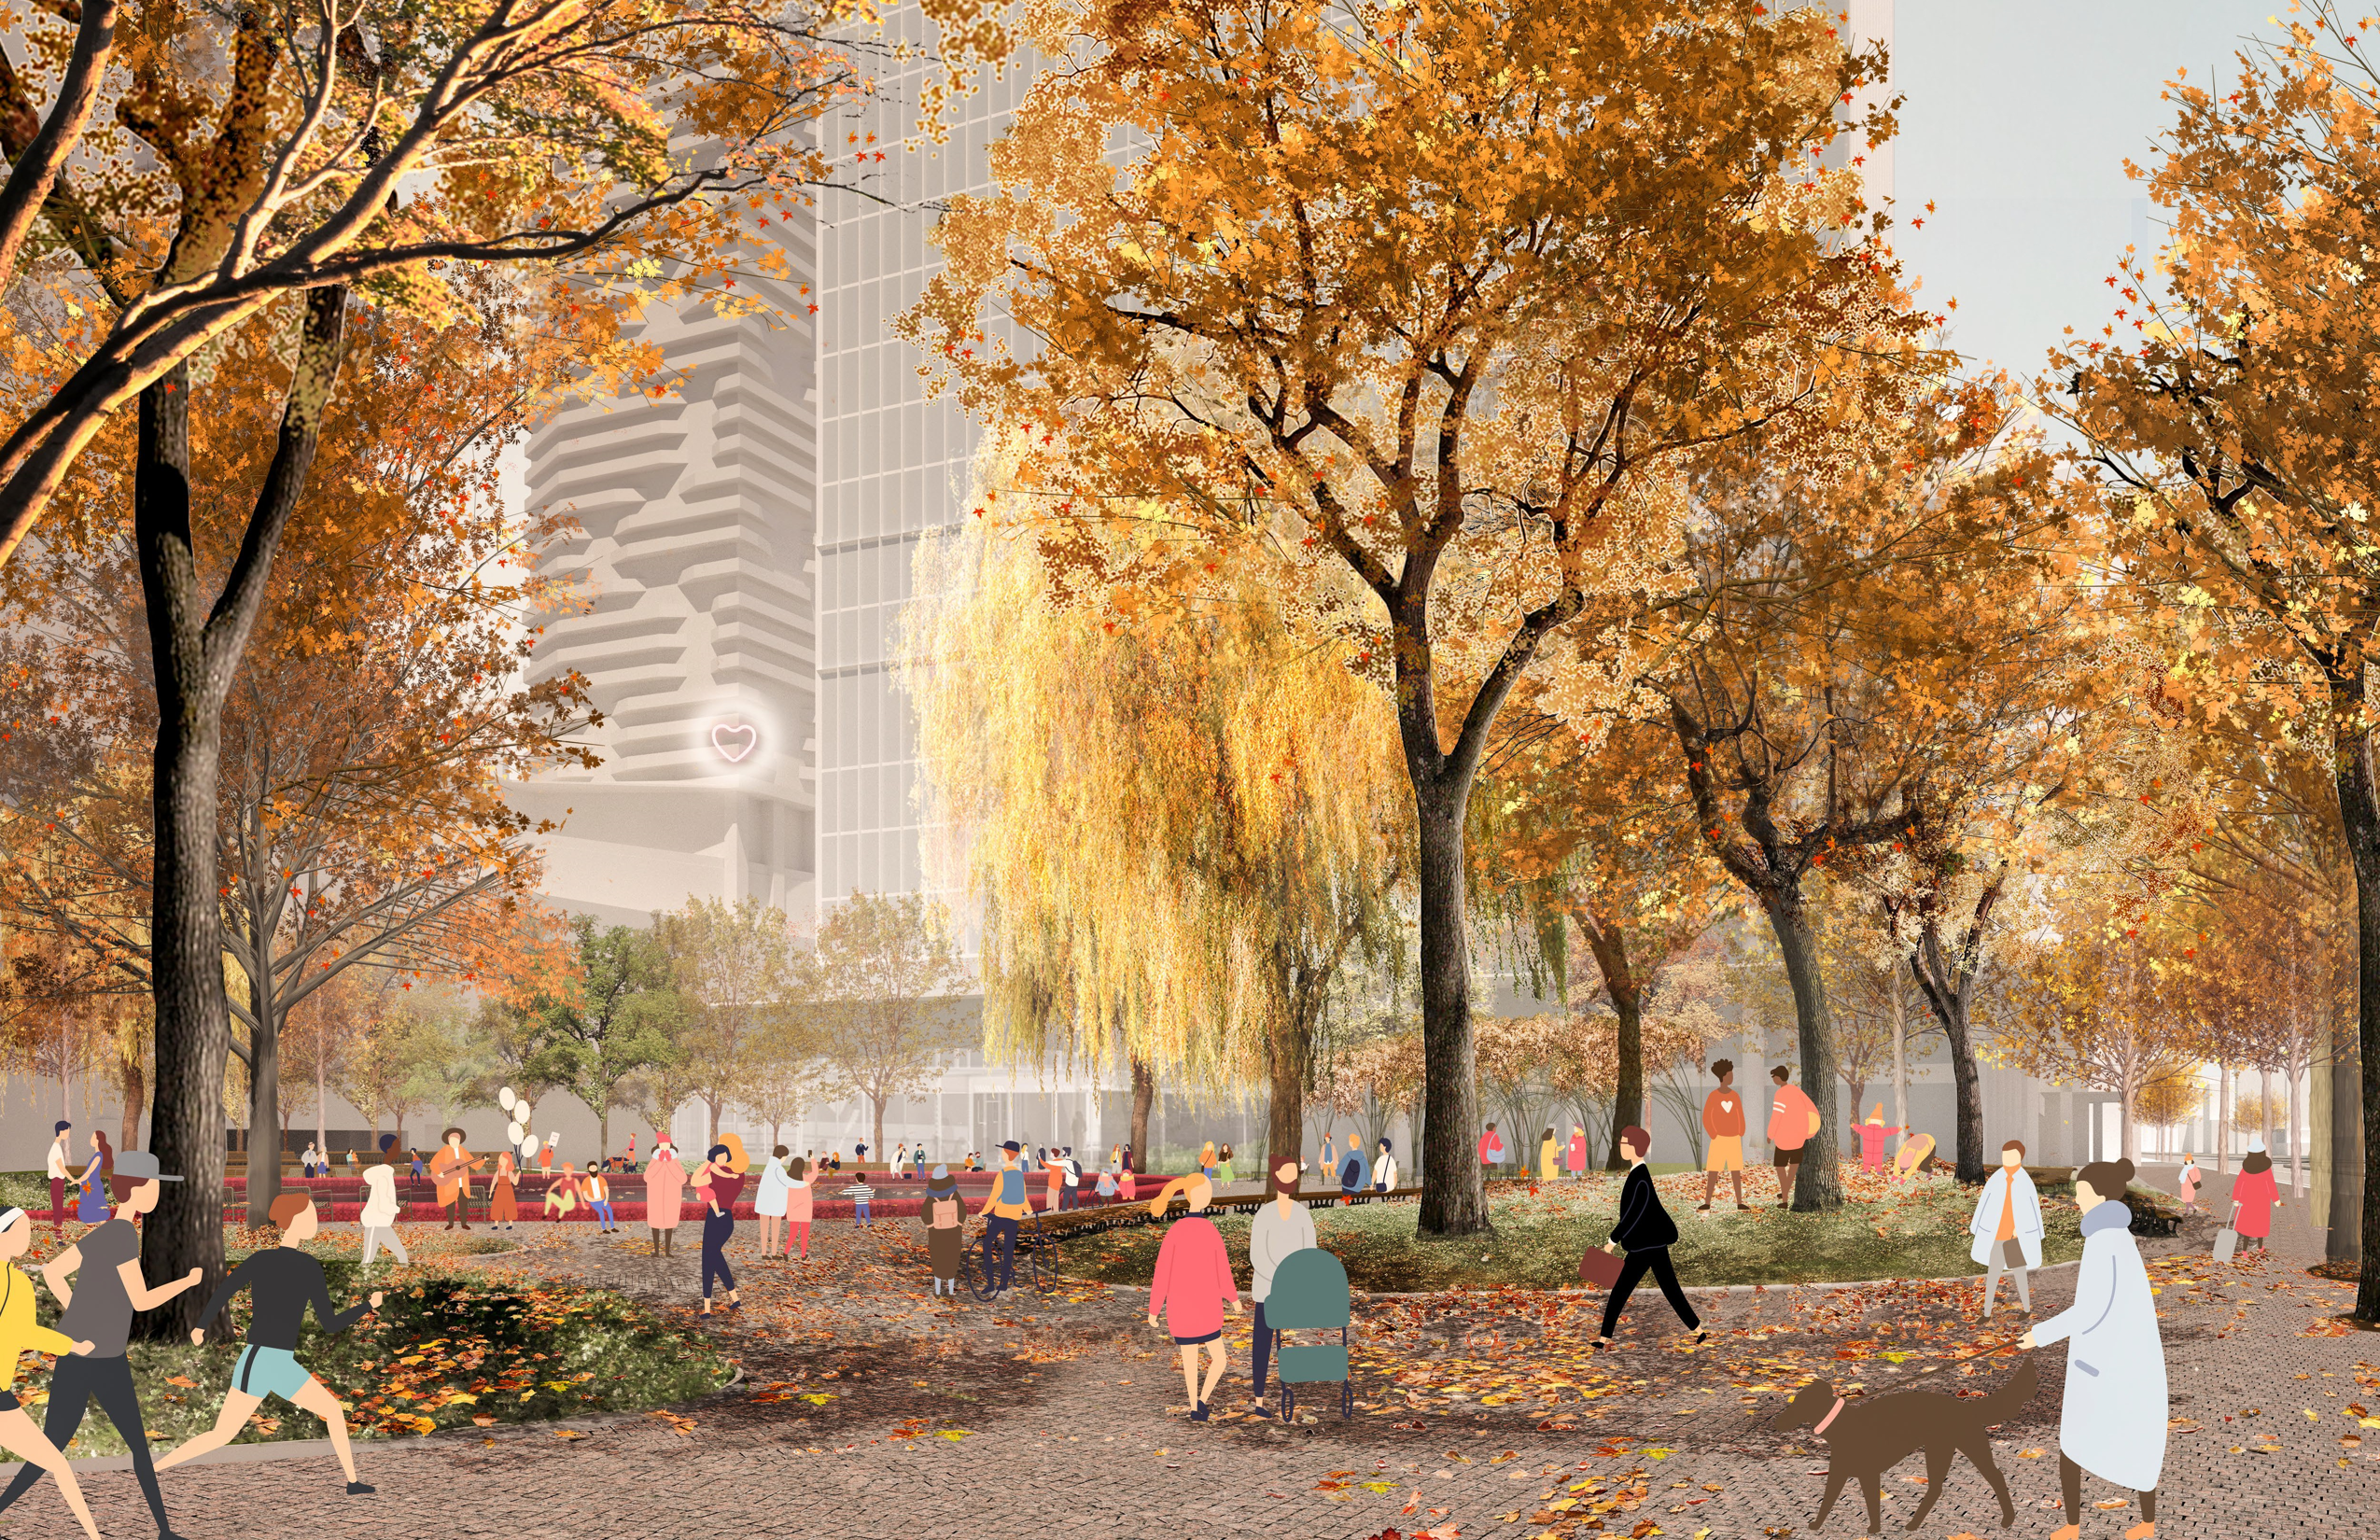 Rendering of Love Park in the fall